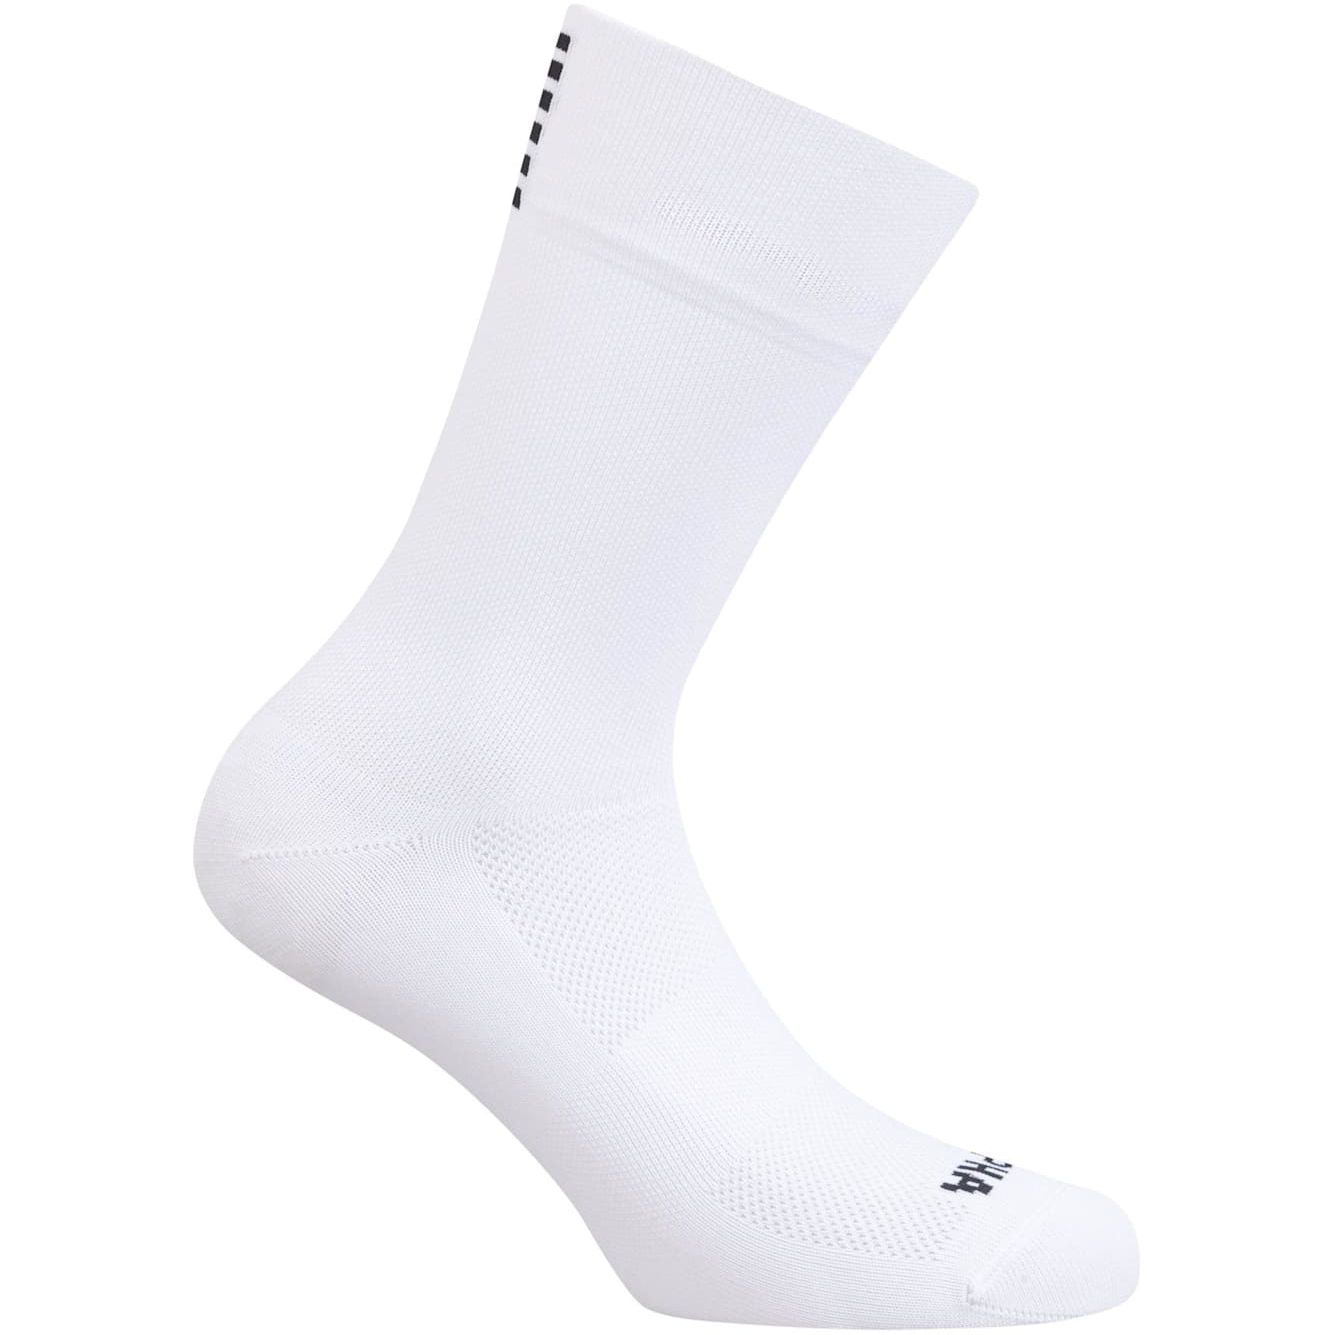 Picture of Rapha Pro Team Socks - white